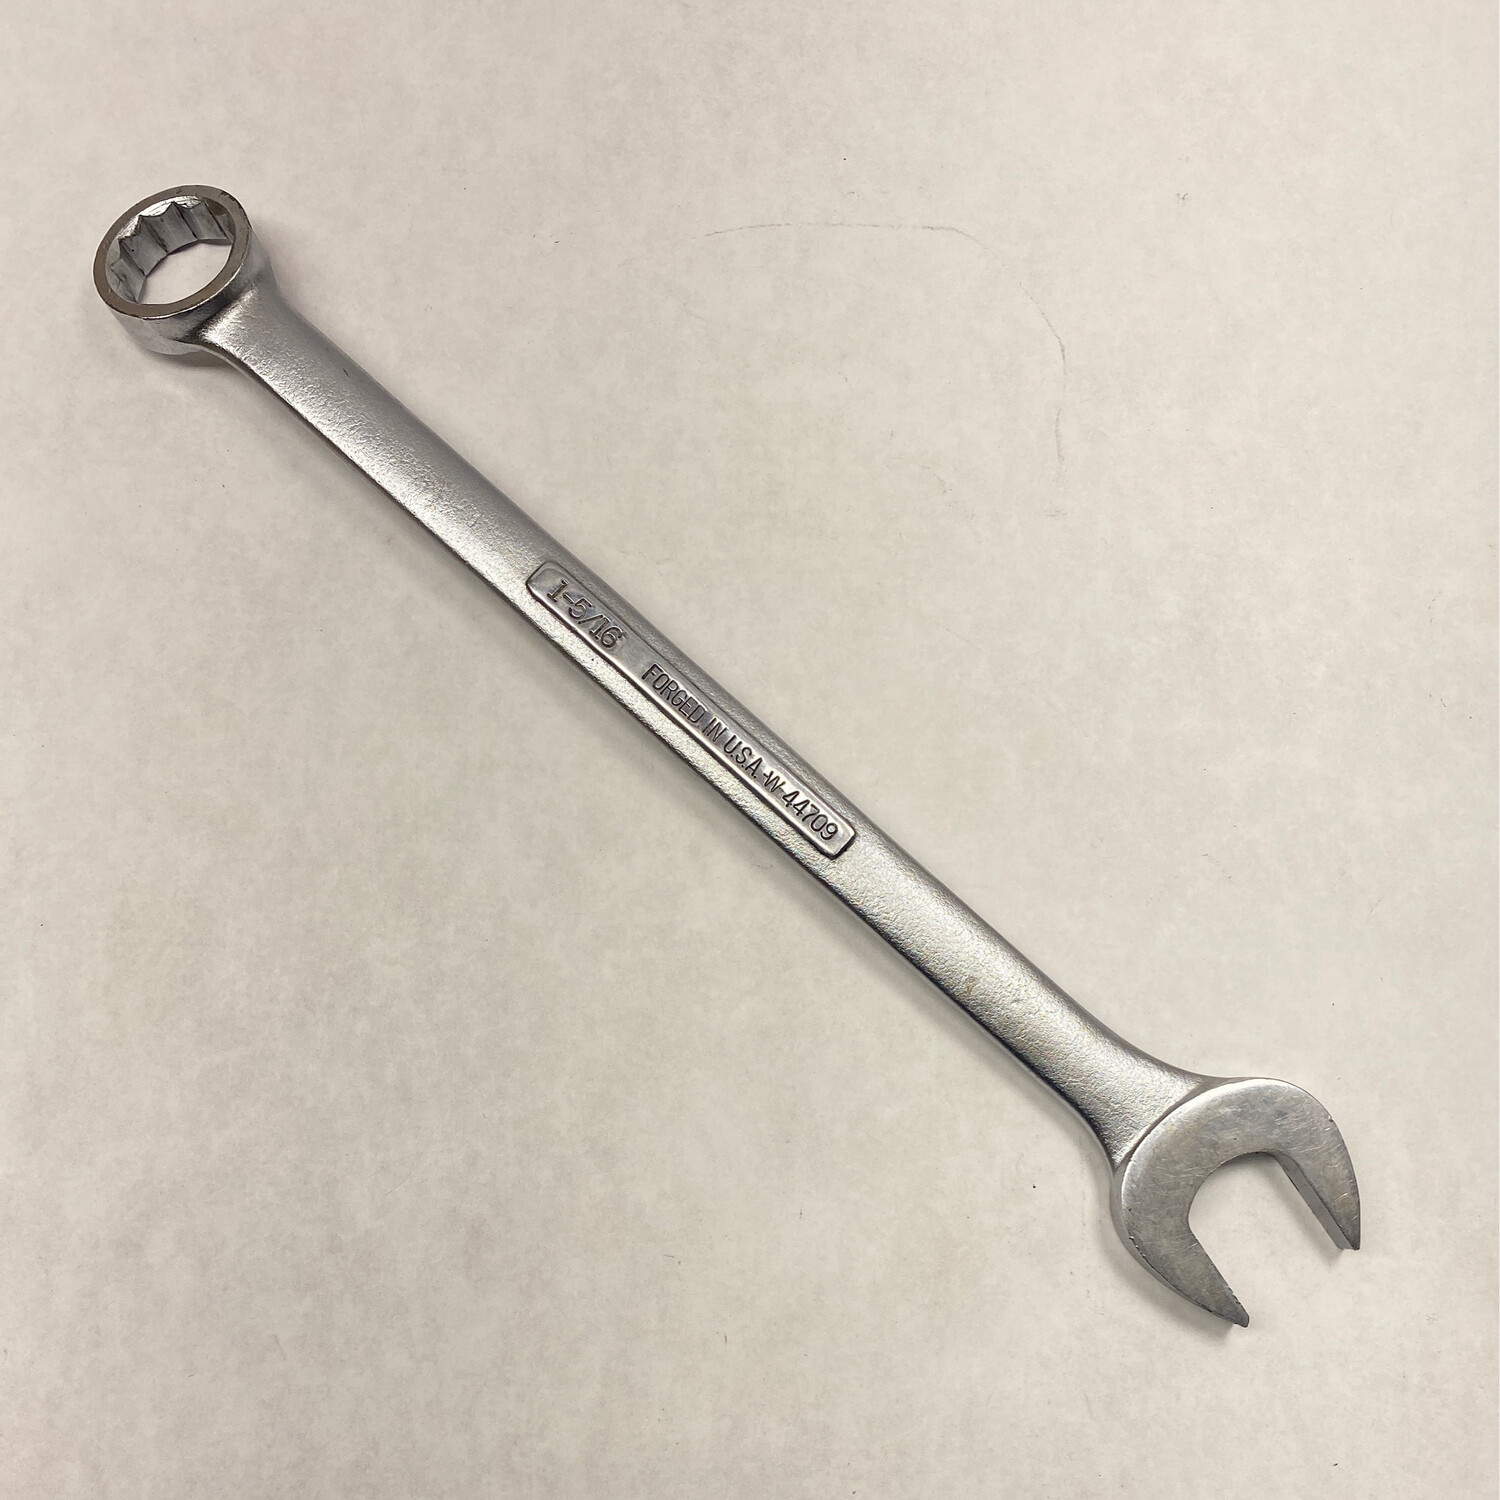 Craftsman 18” 12 Point Combination Wrench (1 5/16”), 44709